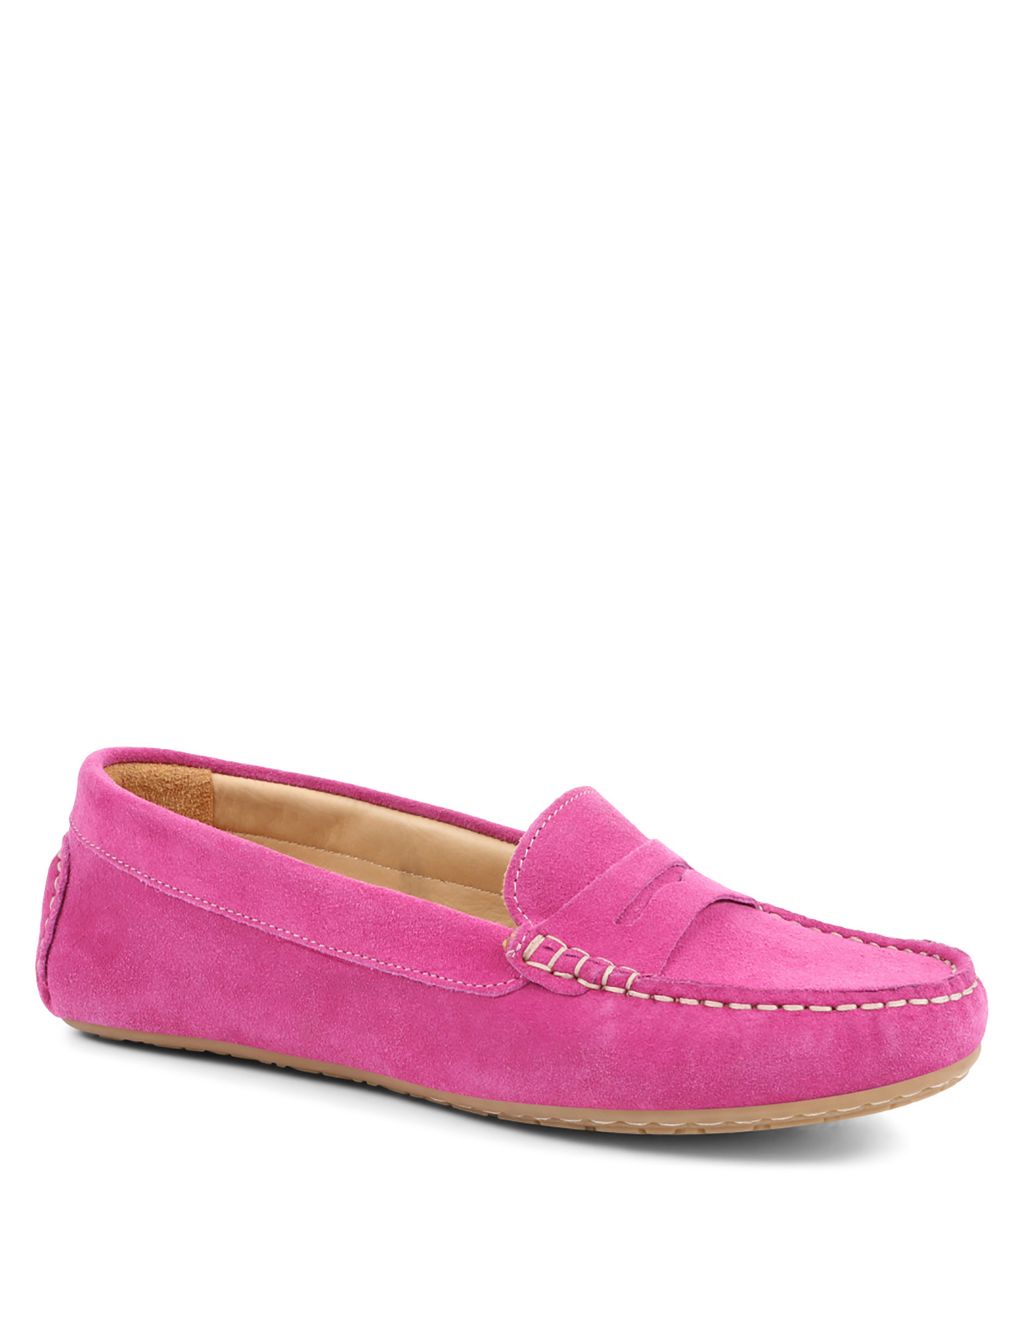 Suede Slip On Loafers image 3